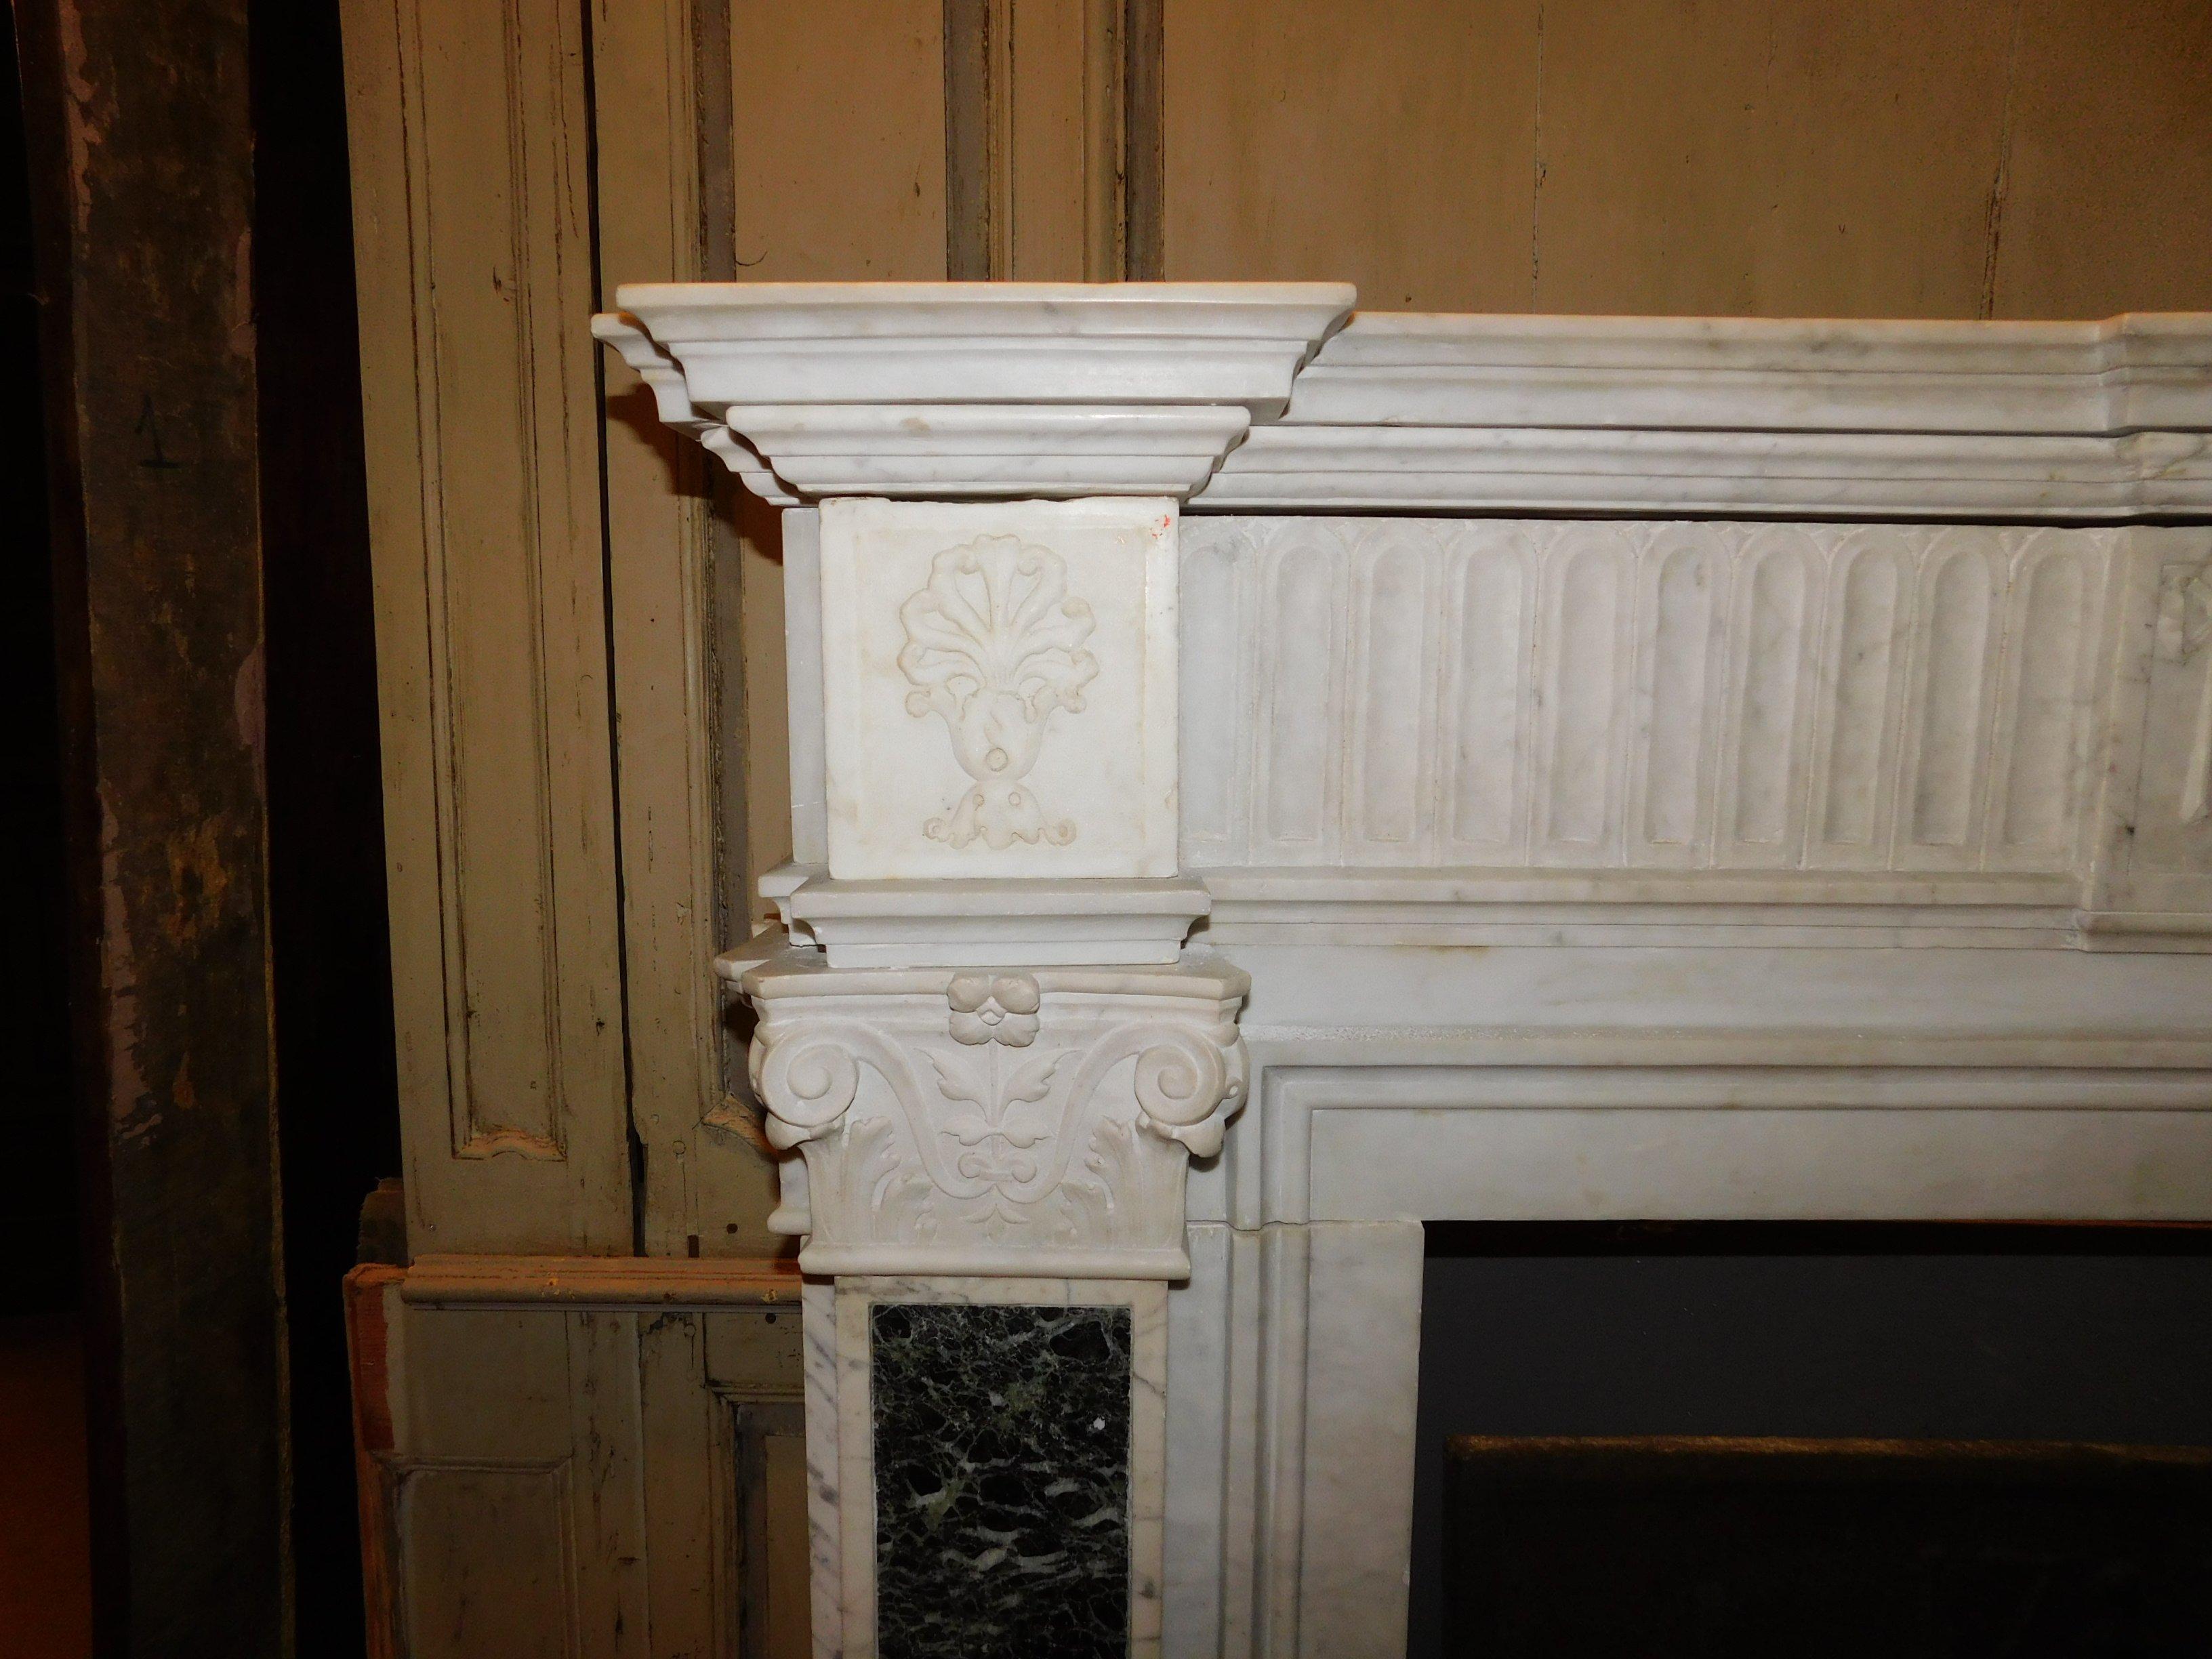 Mid-18th Century Antique Fireplace Mantel in White Carrara Marble, Verde Alpi Marble Inlays, 1700